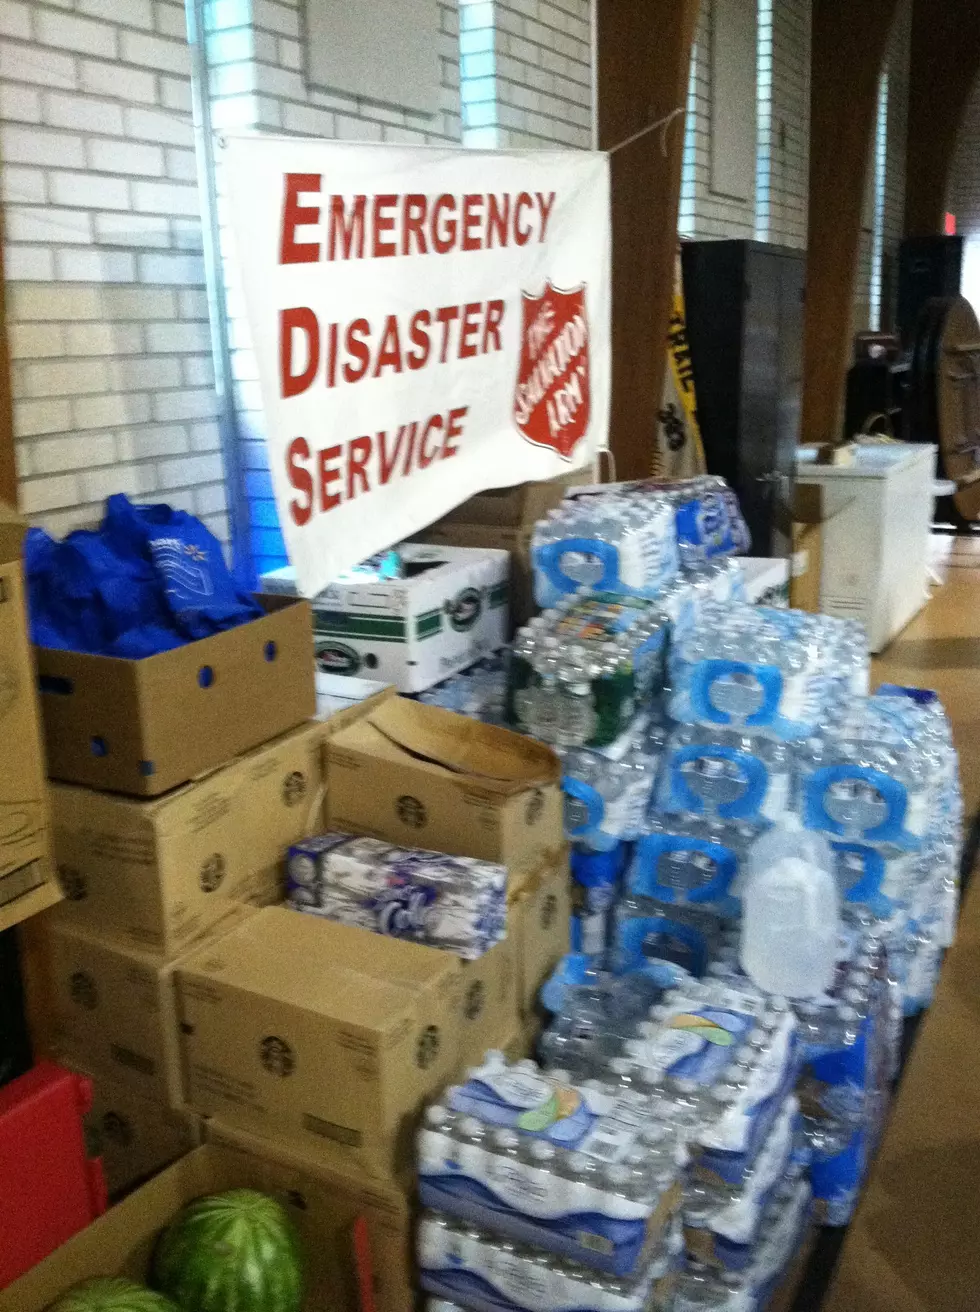 Salvation Army, Red Cross Provide Flood Relief